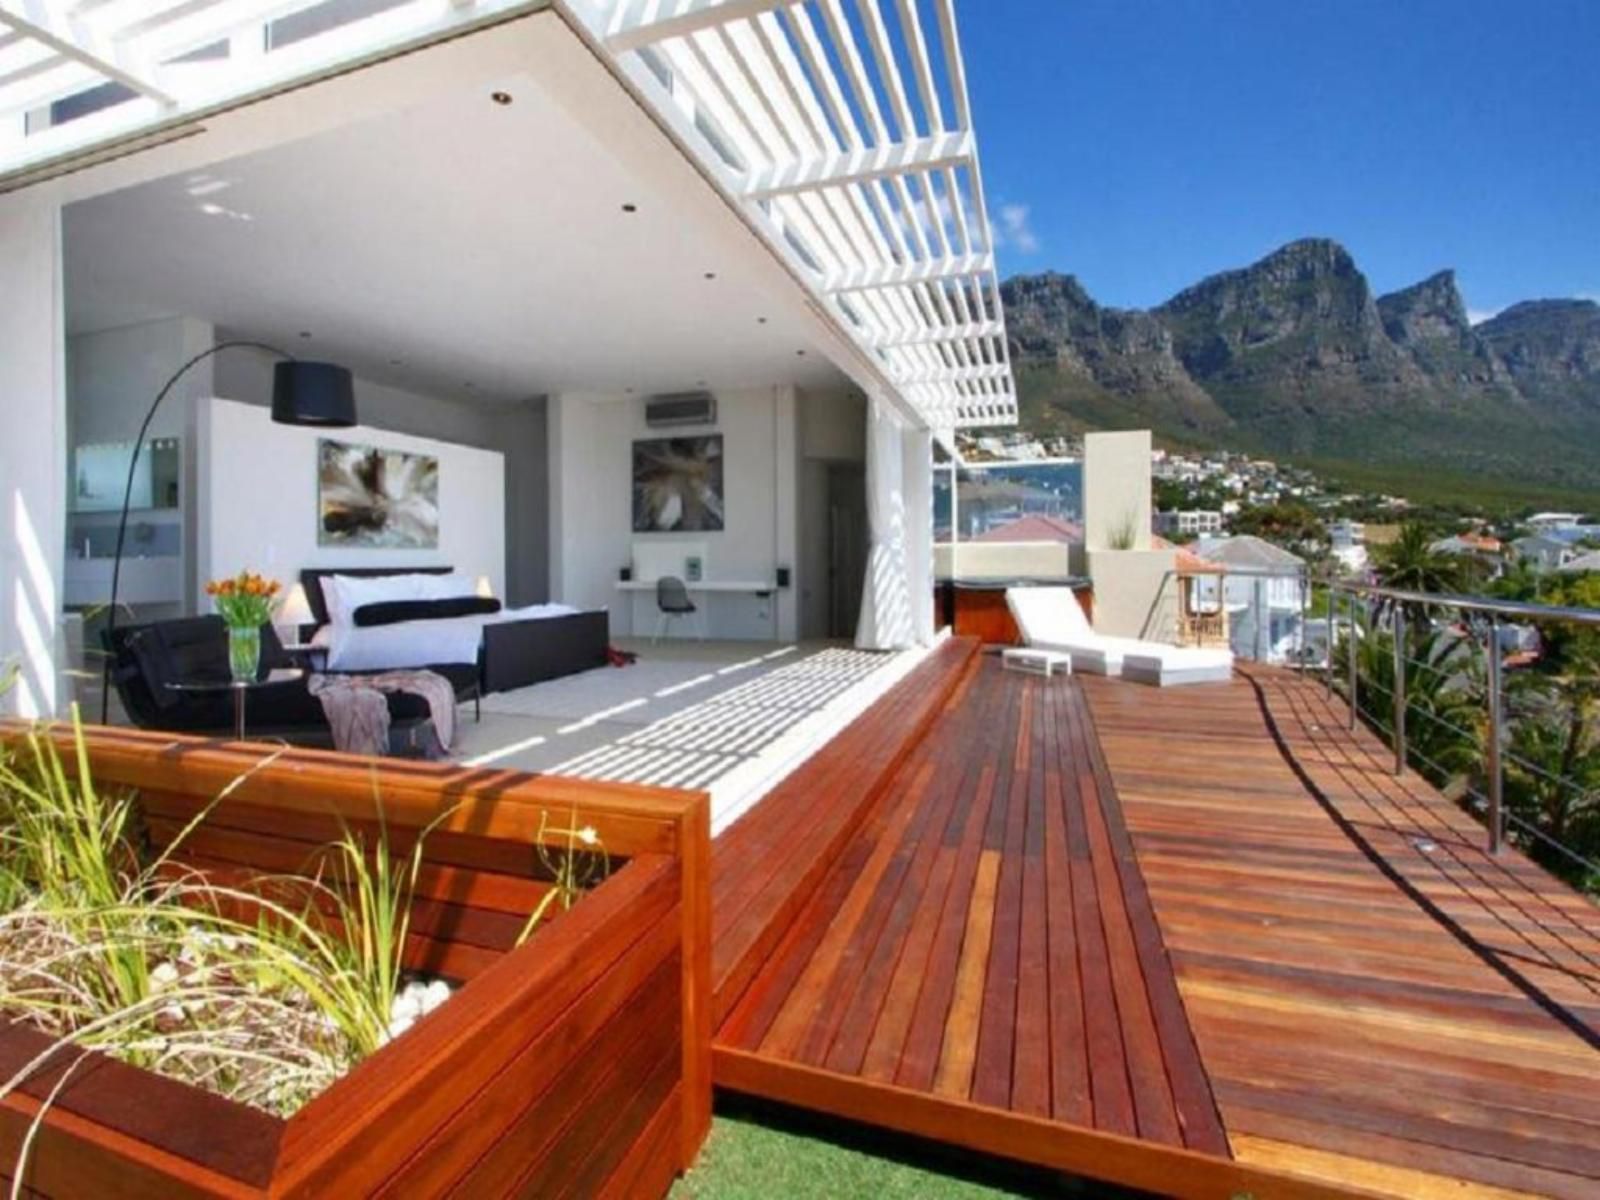 Villa Dolce Vita Camps Bay Cape Town Western Cape South Africa House, Building, Architecture